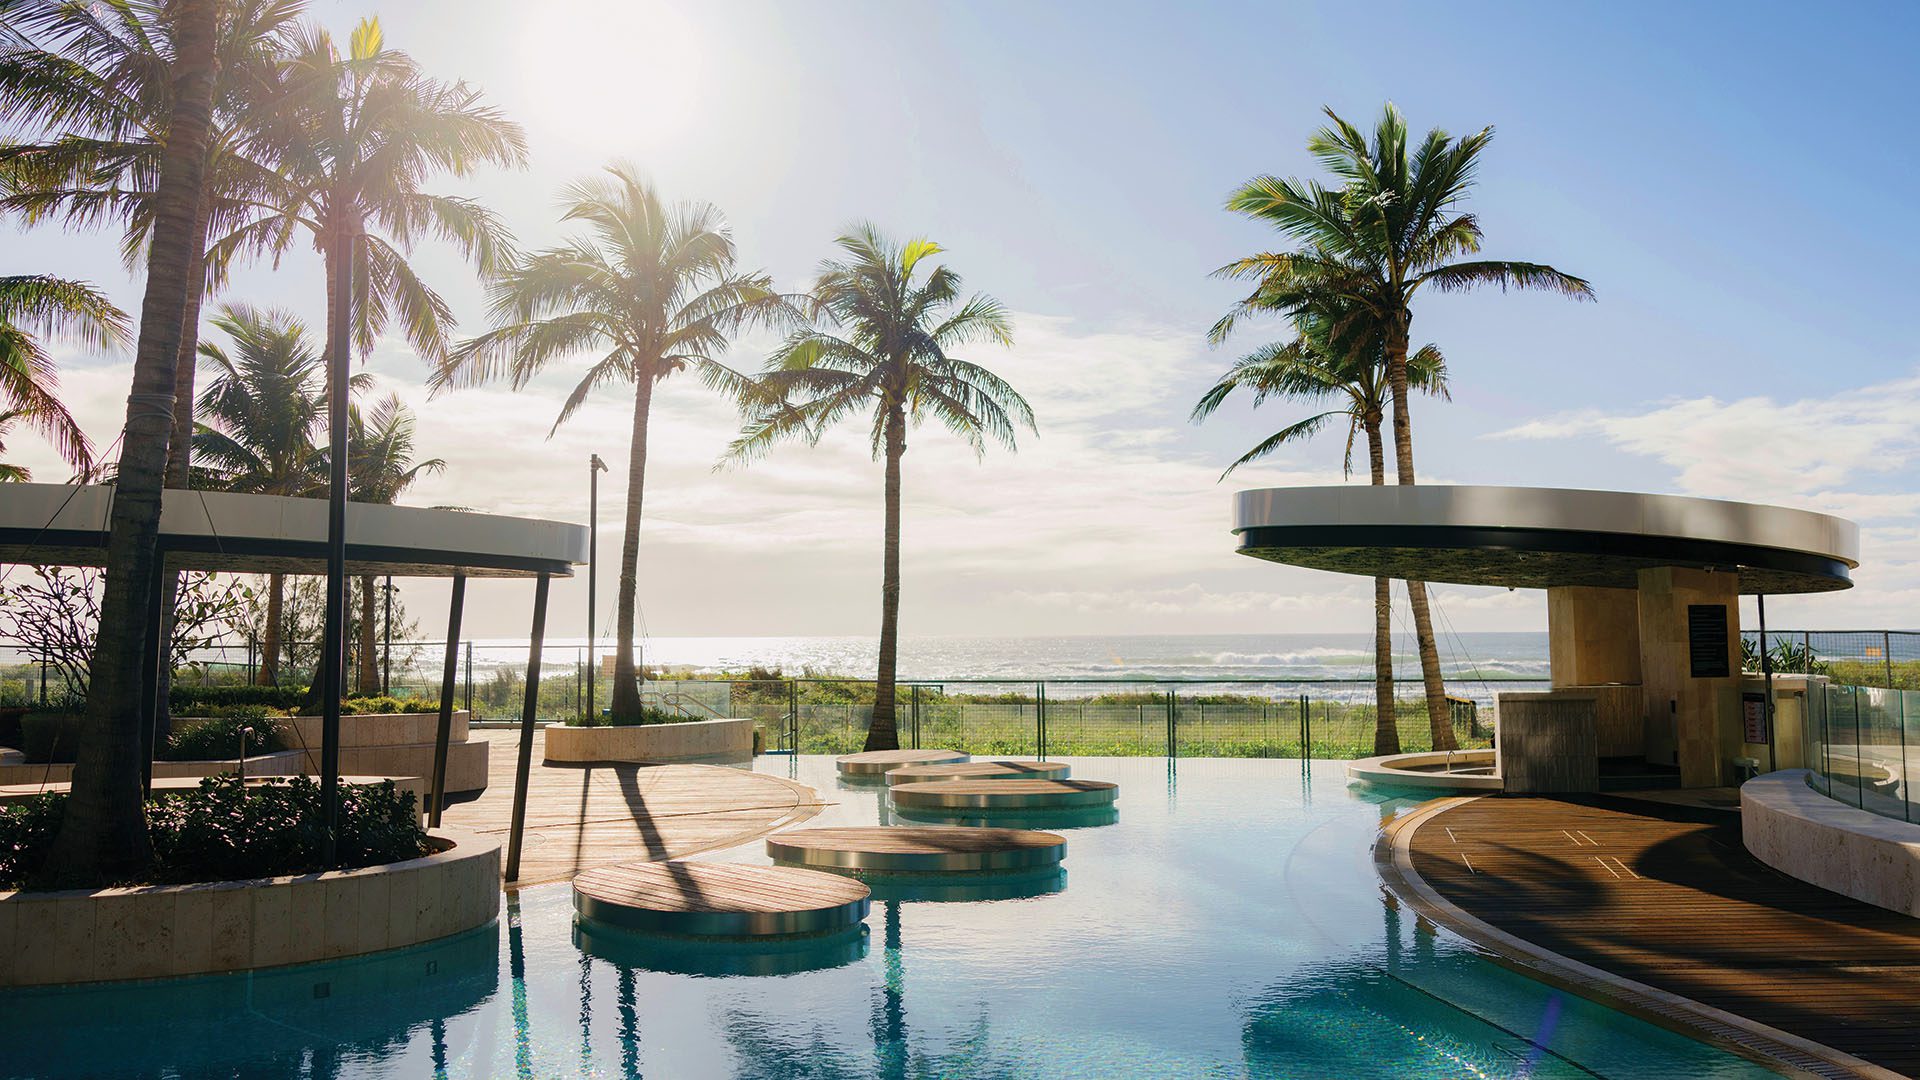 Experience a new level of luxury at The Langham Gold Coast